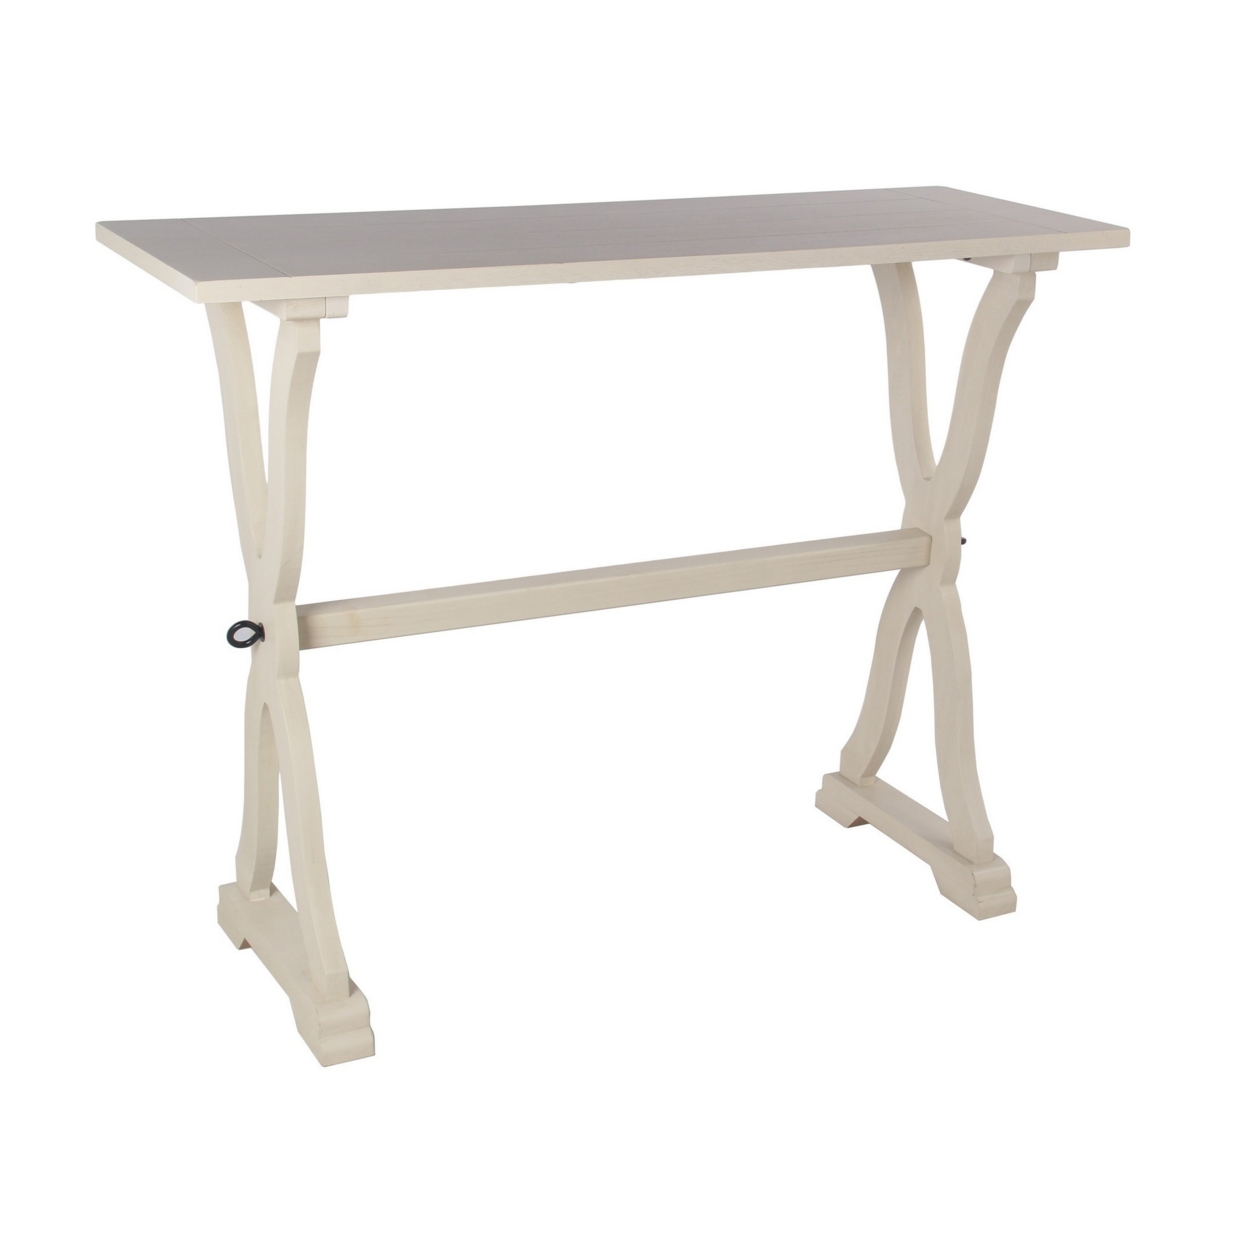 Pablo 38 Inch Classic Accent Console Table With Sled Base, Crisp White Rose- Saltoro Sherpi